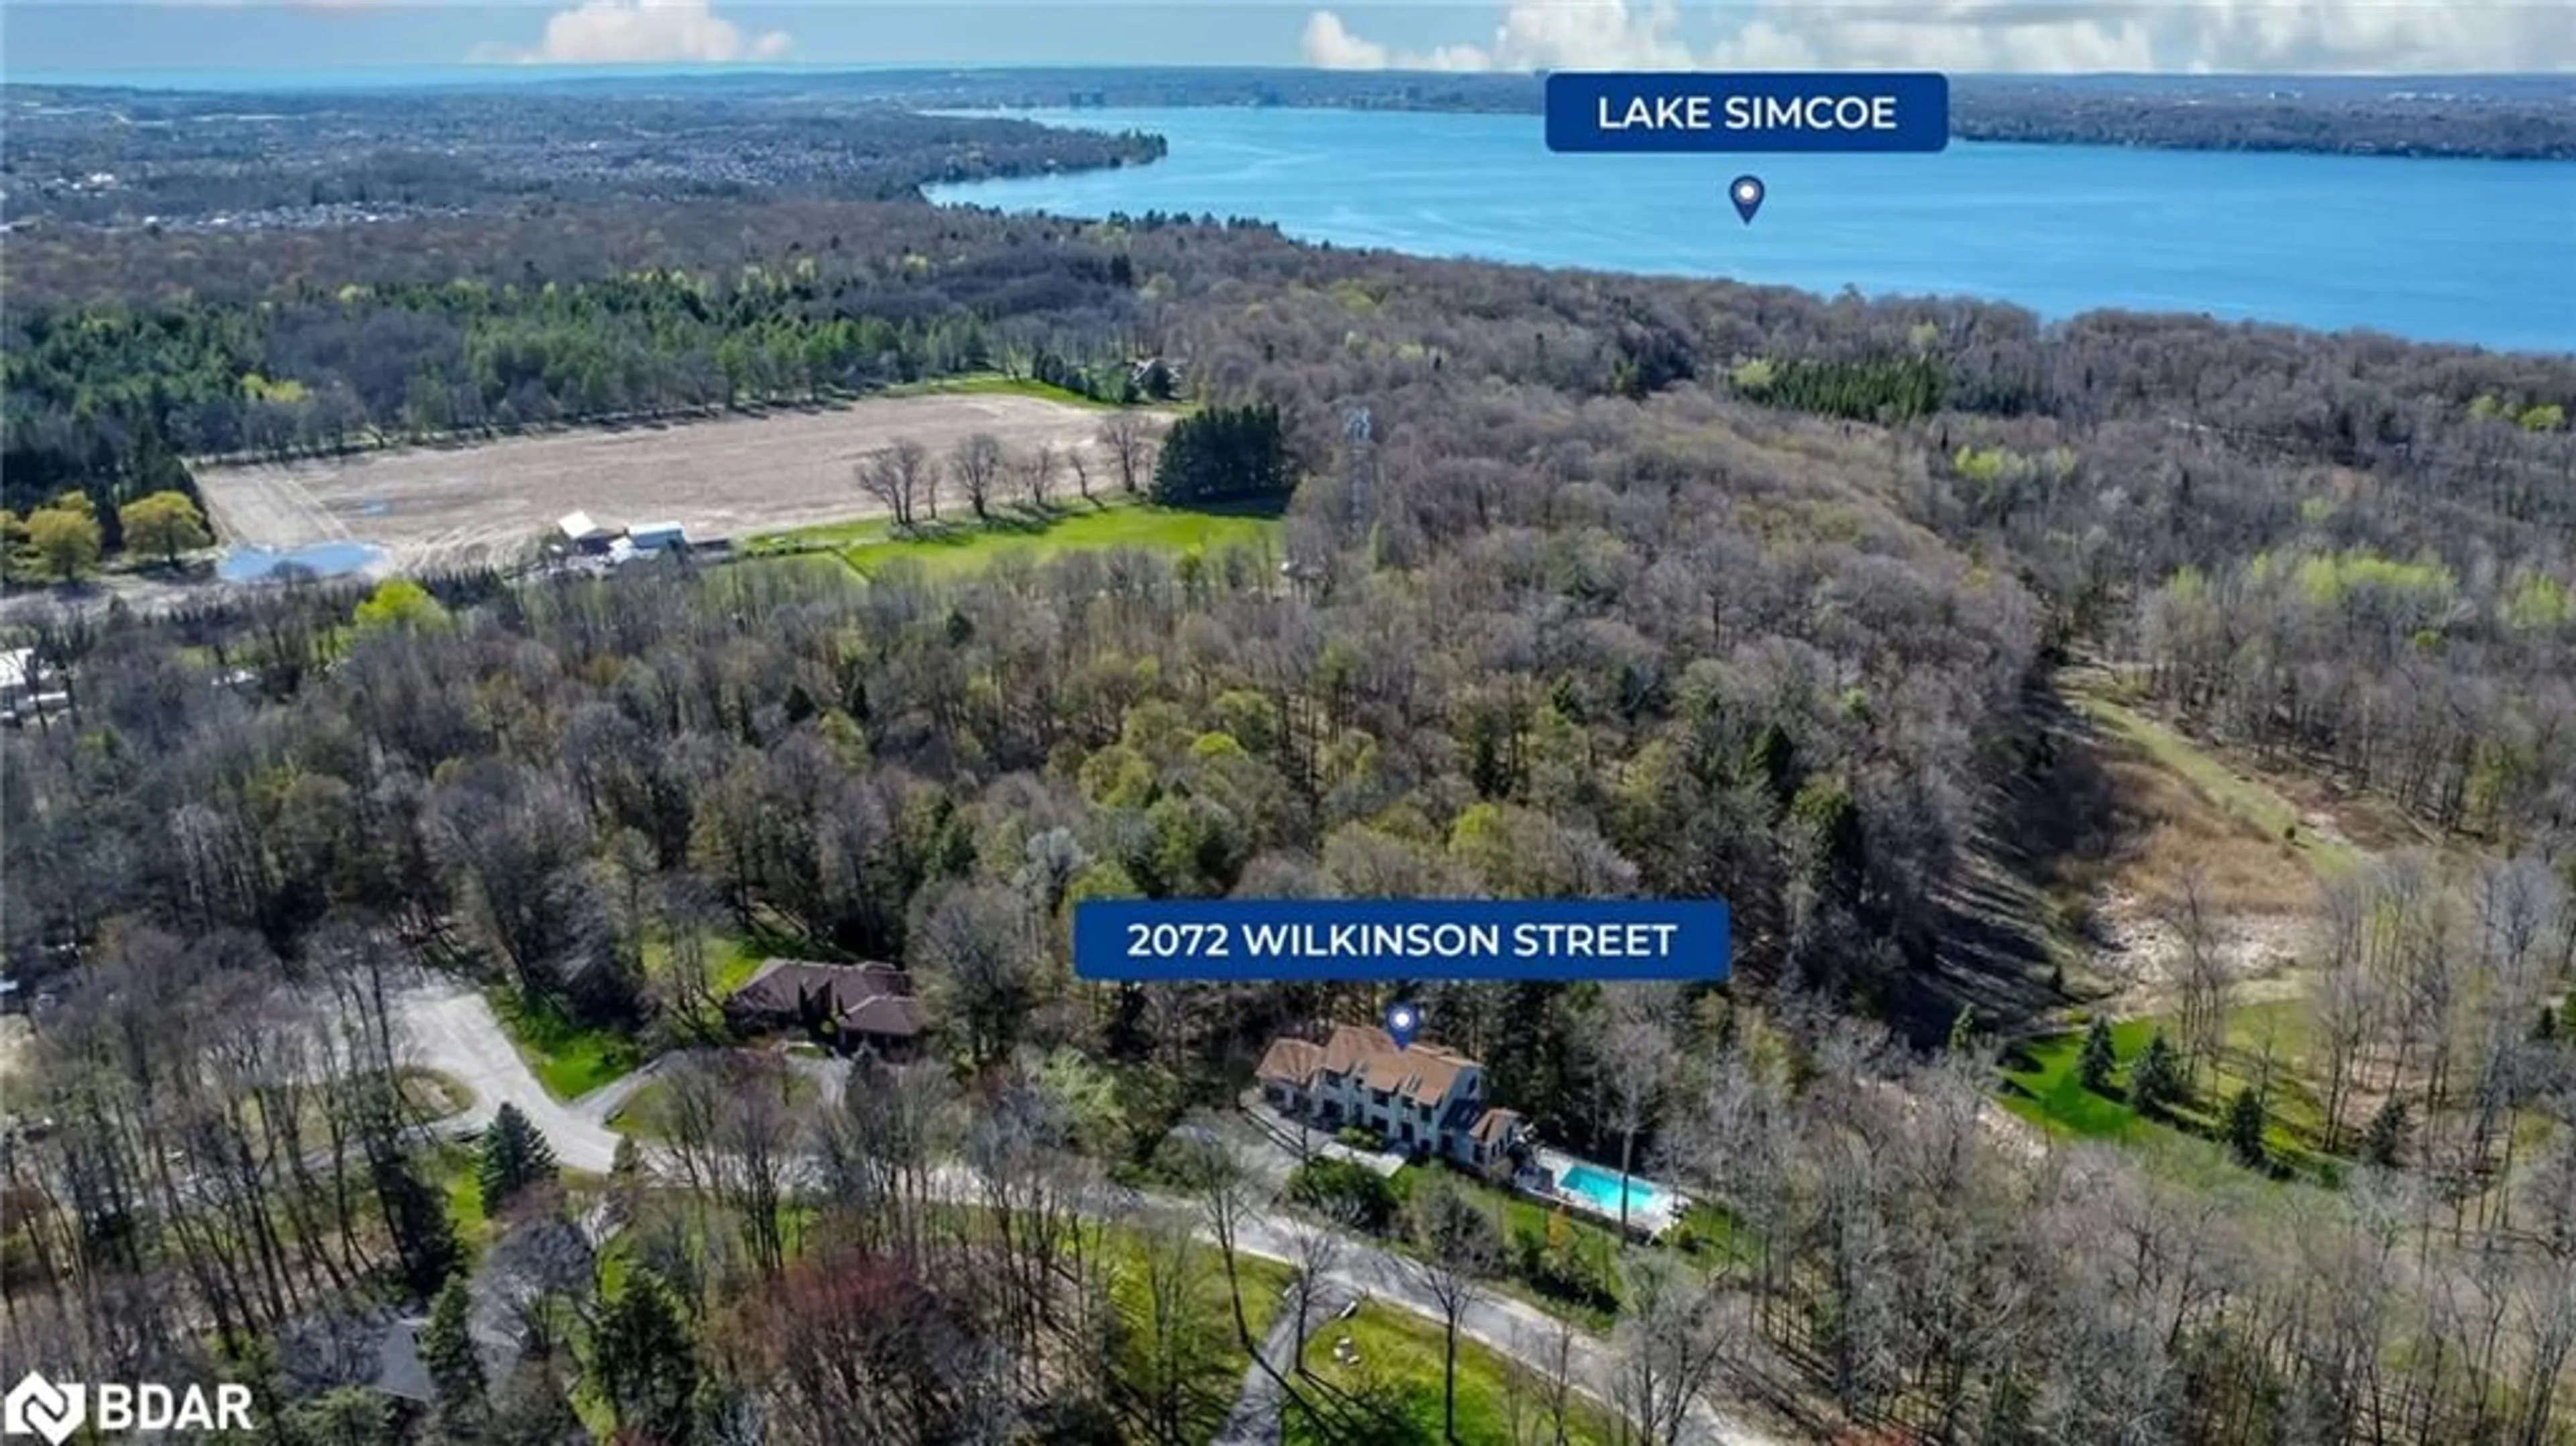 Lakeview for 2072 Wilkinson St, Innisfil Ontario L9S 1X3